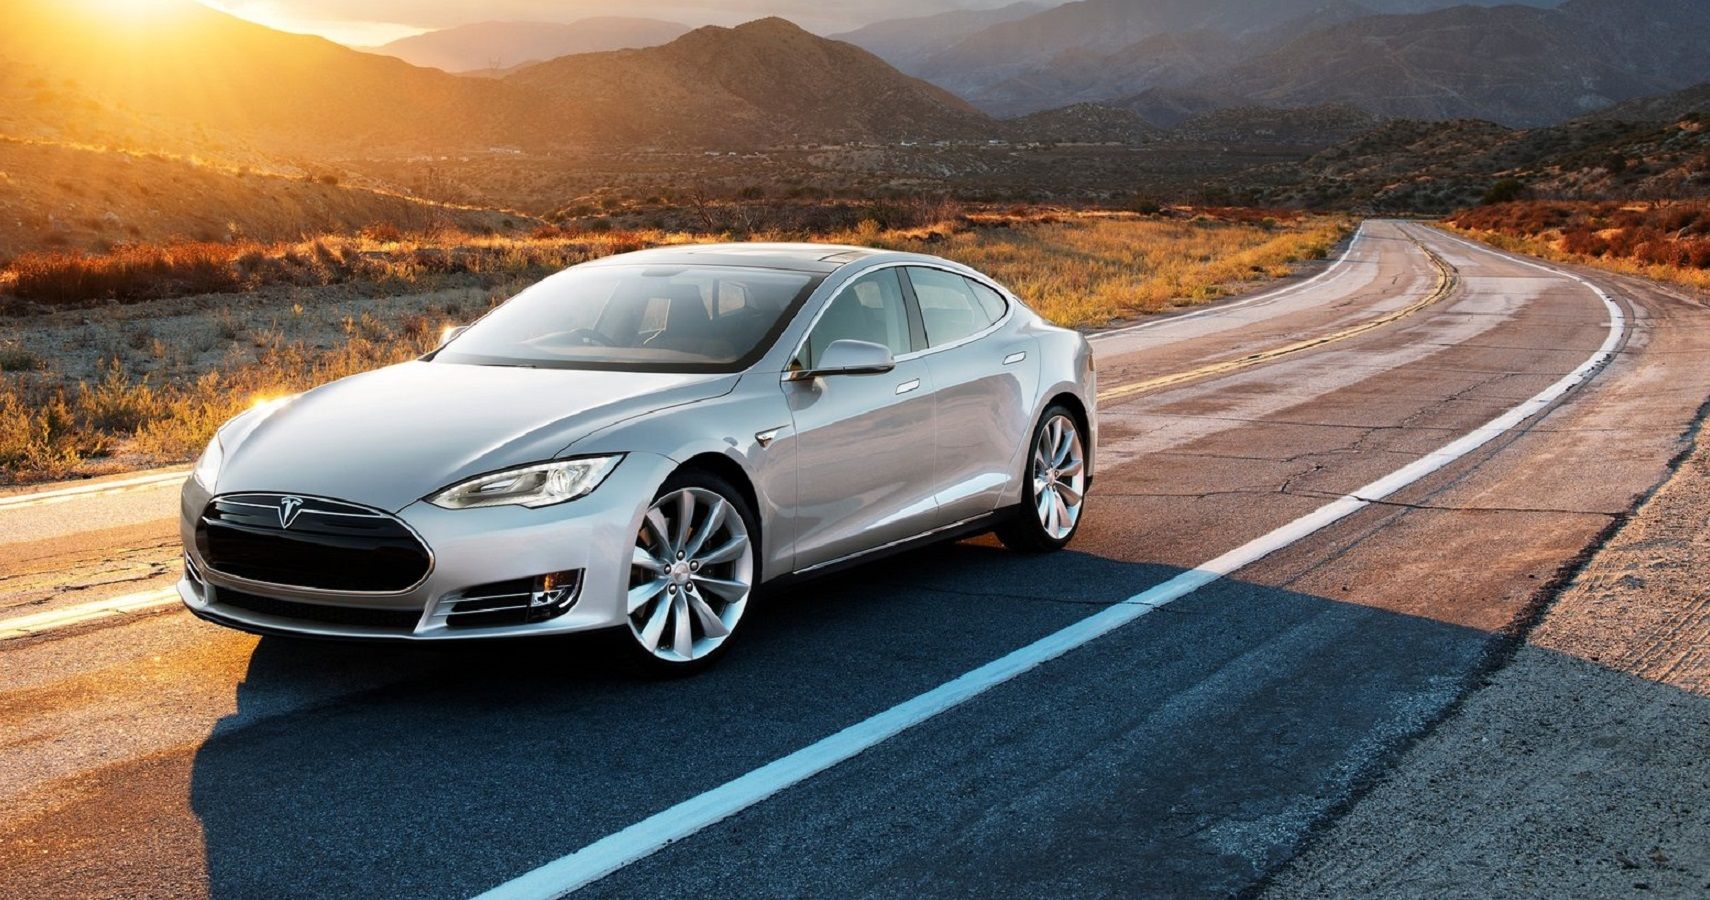 Tesla Model S racing on road at sunset